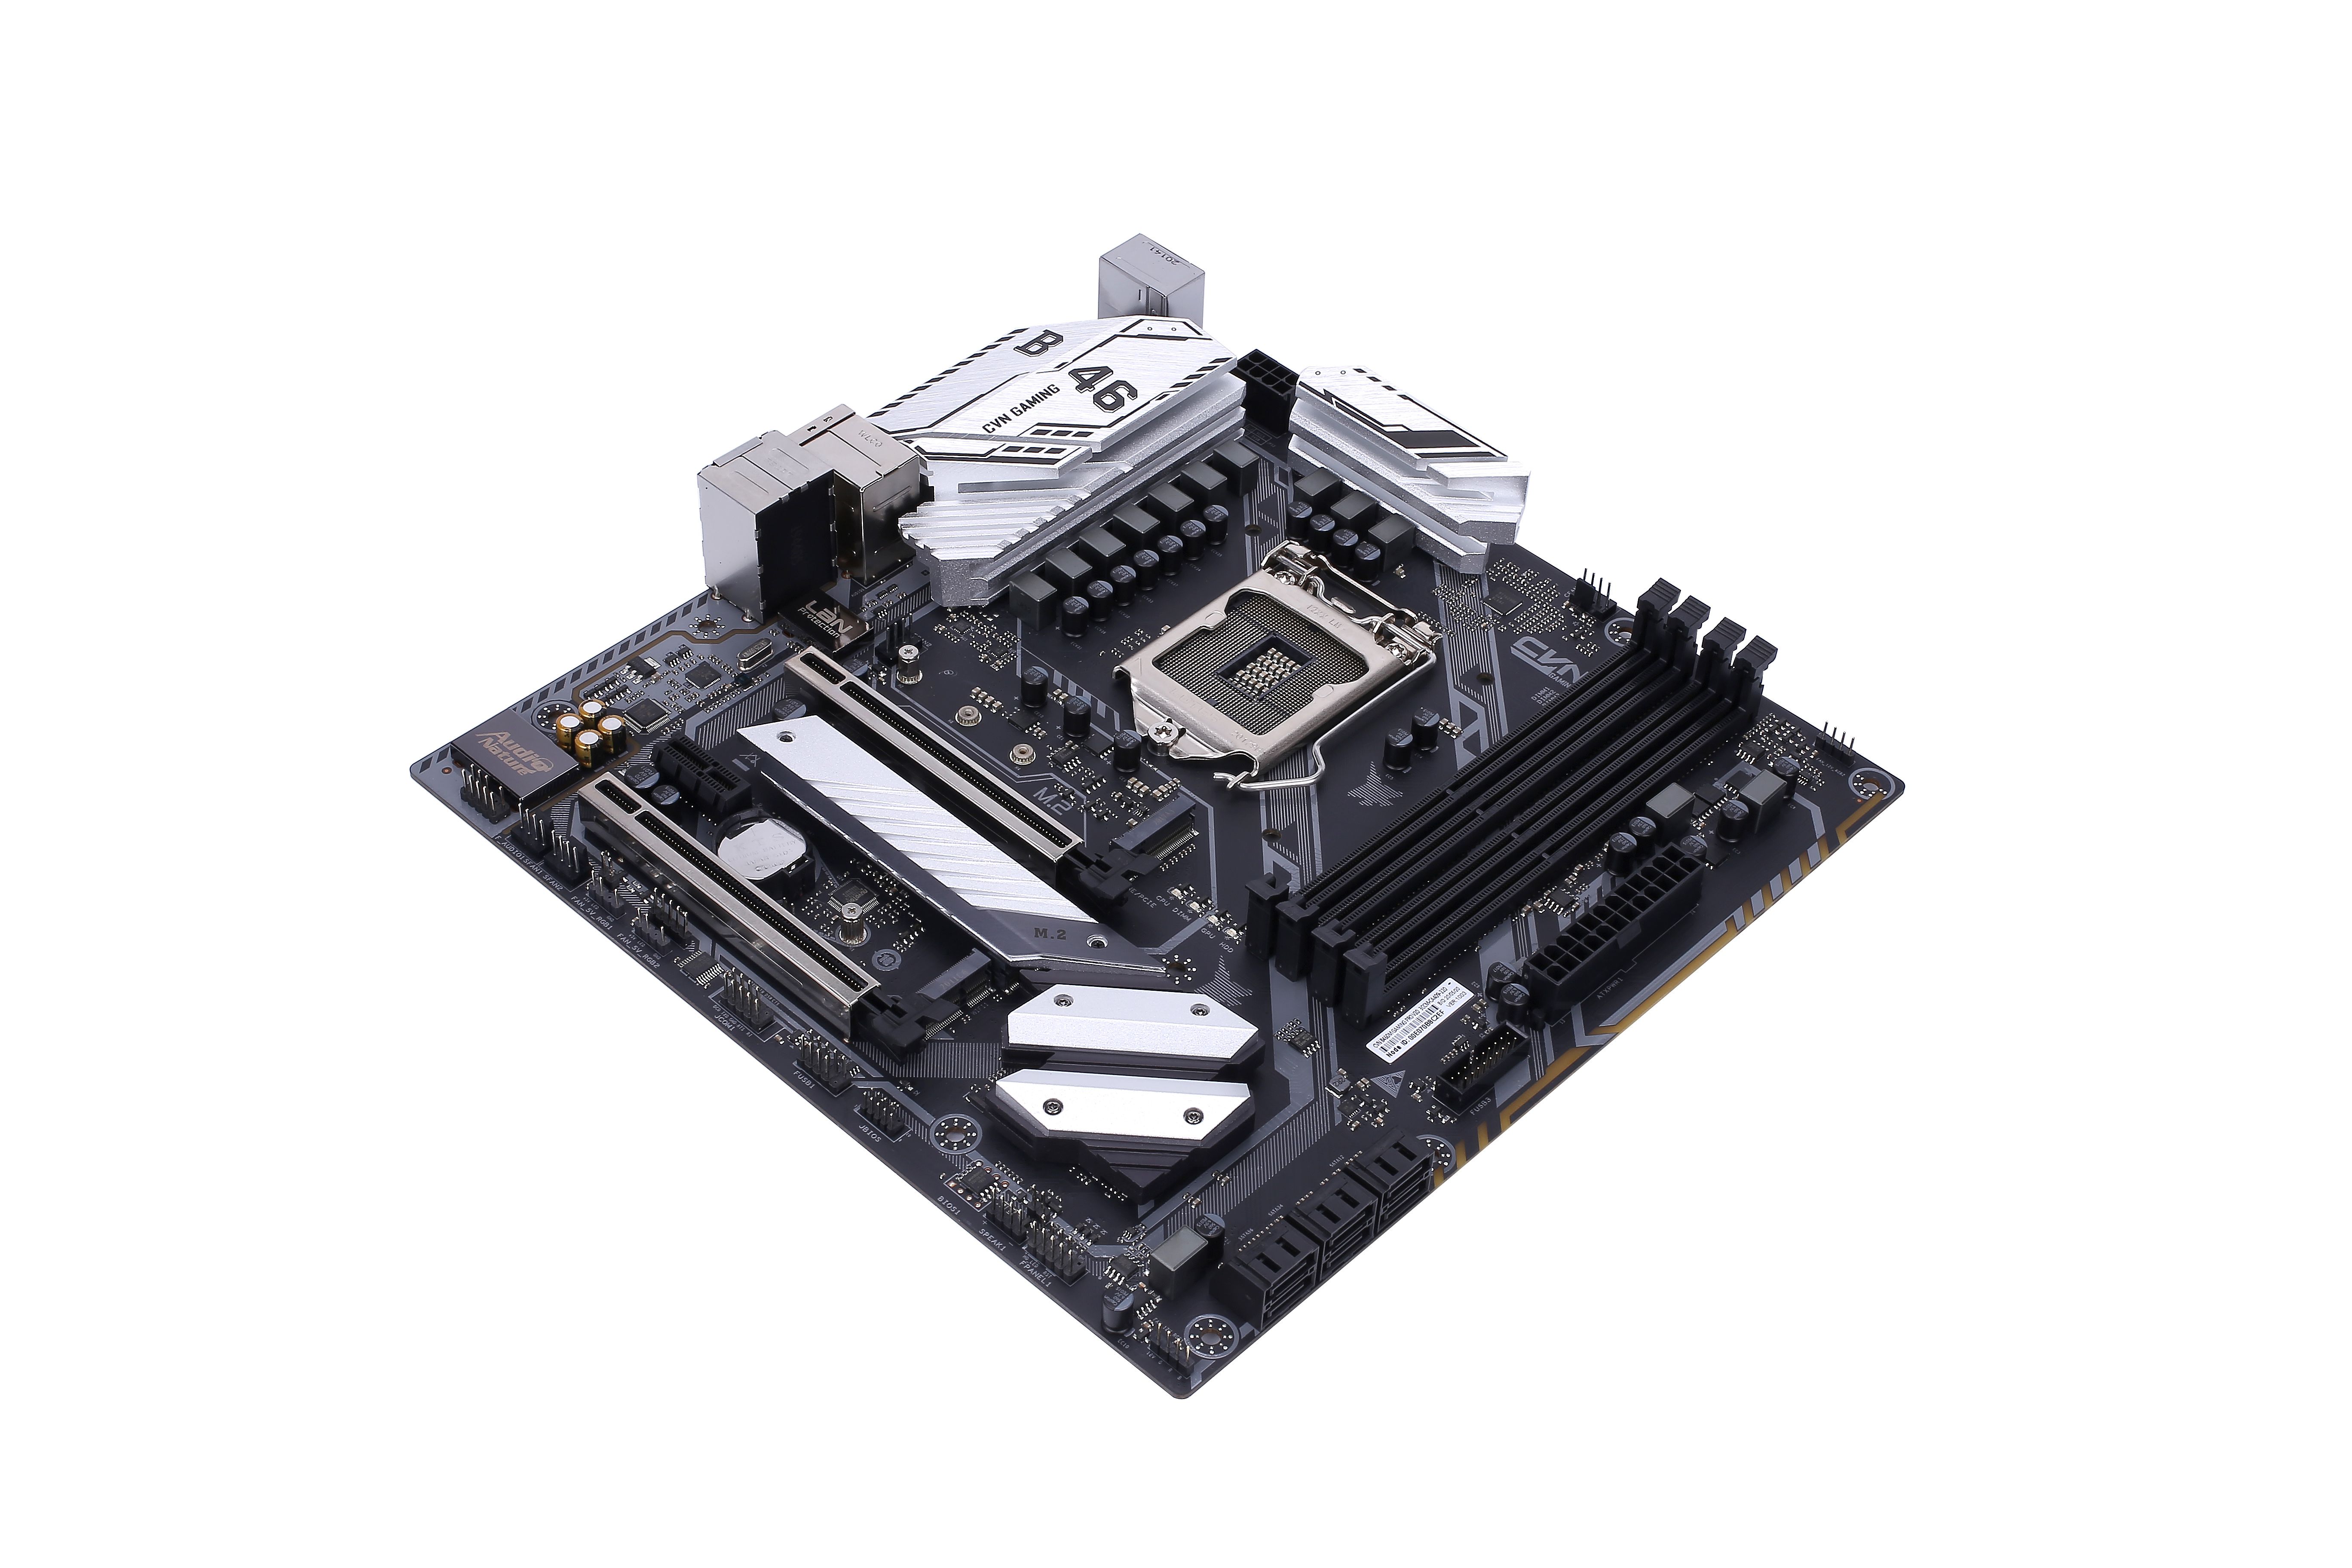 Colorful-CVN-B460M-GAMING-PRO-V20-Computer-Motherboard-PC-Desktop-Motherboard-Supports-10th-Generati-1710083